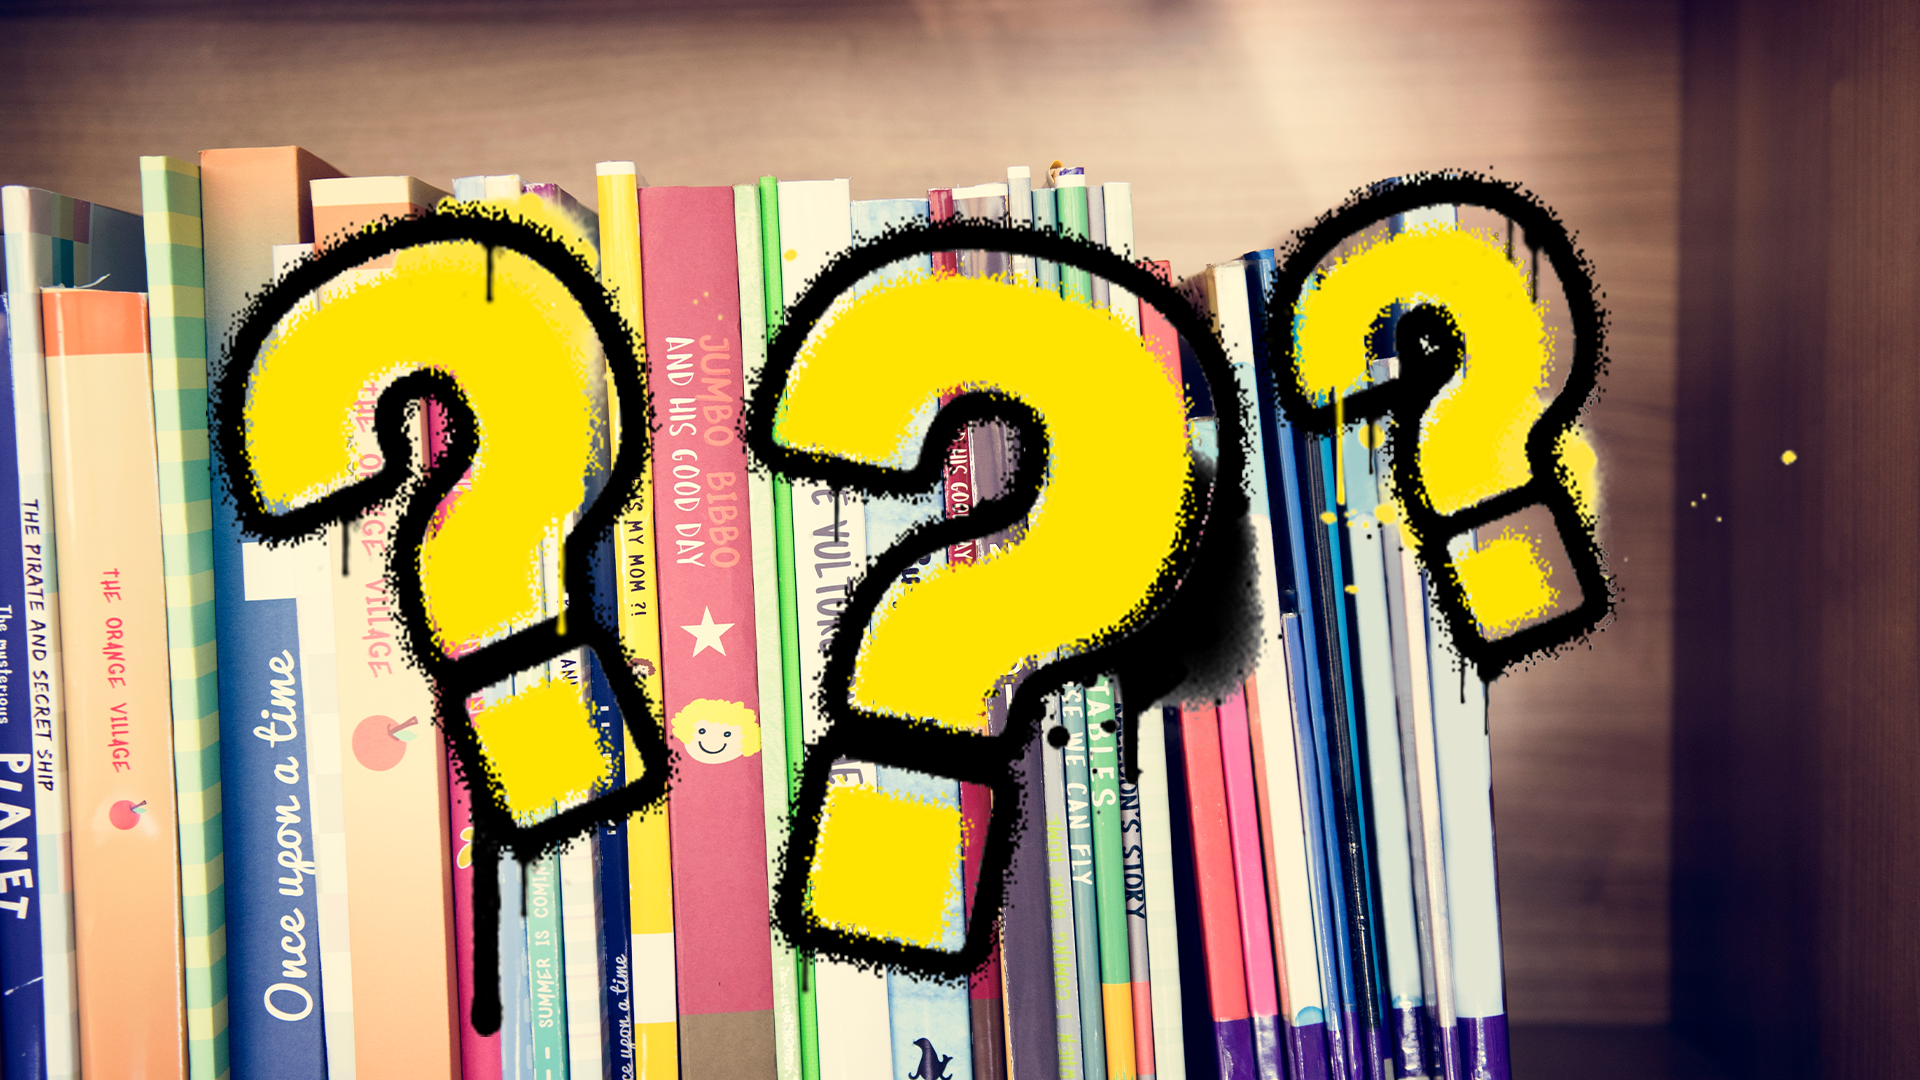 Books and question marks